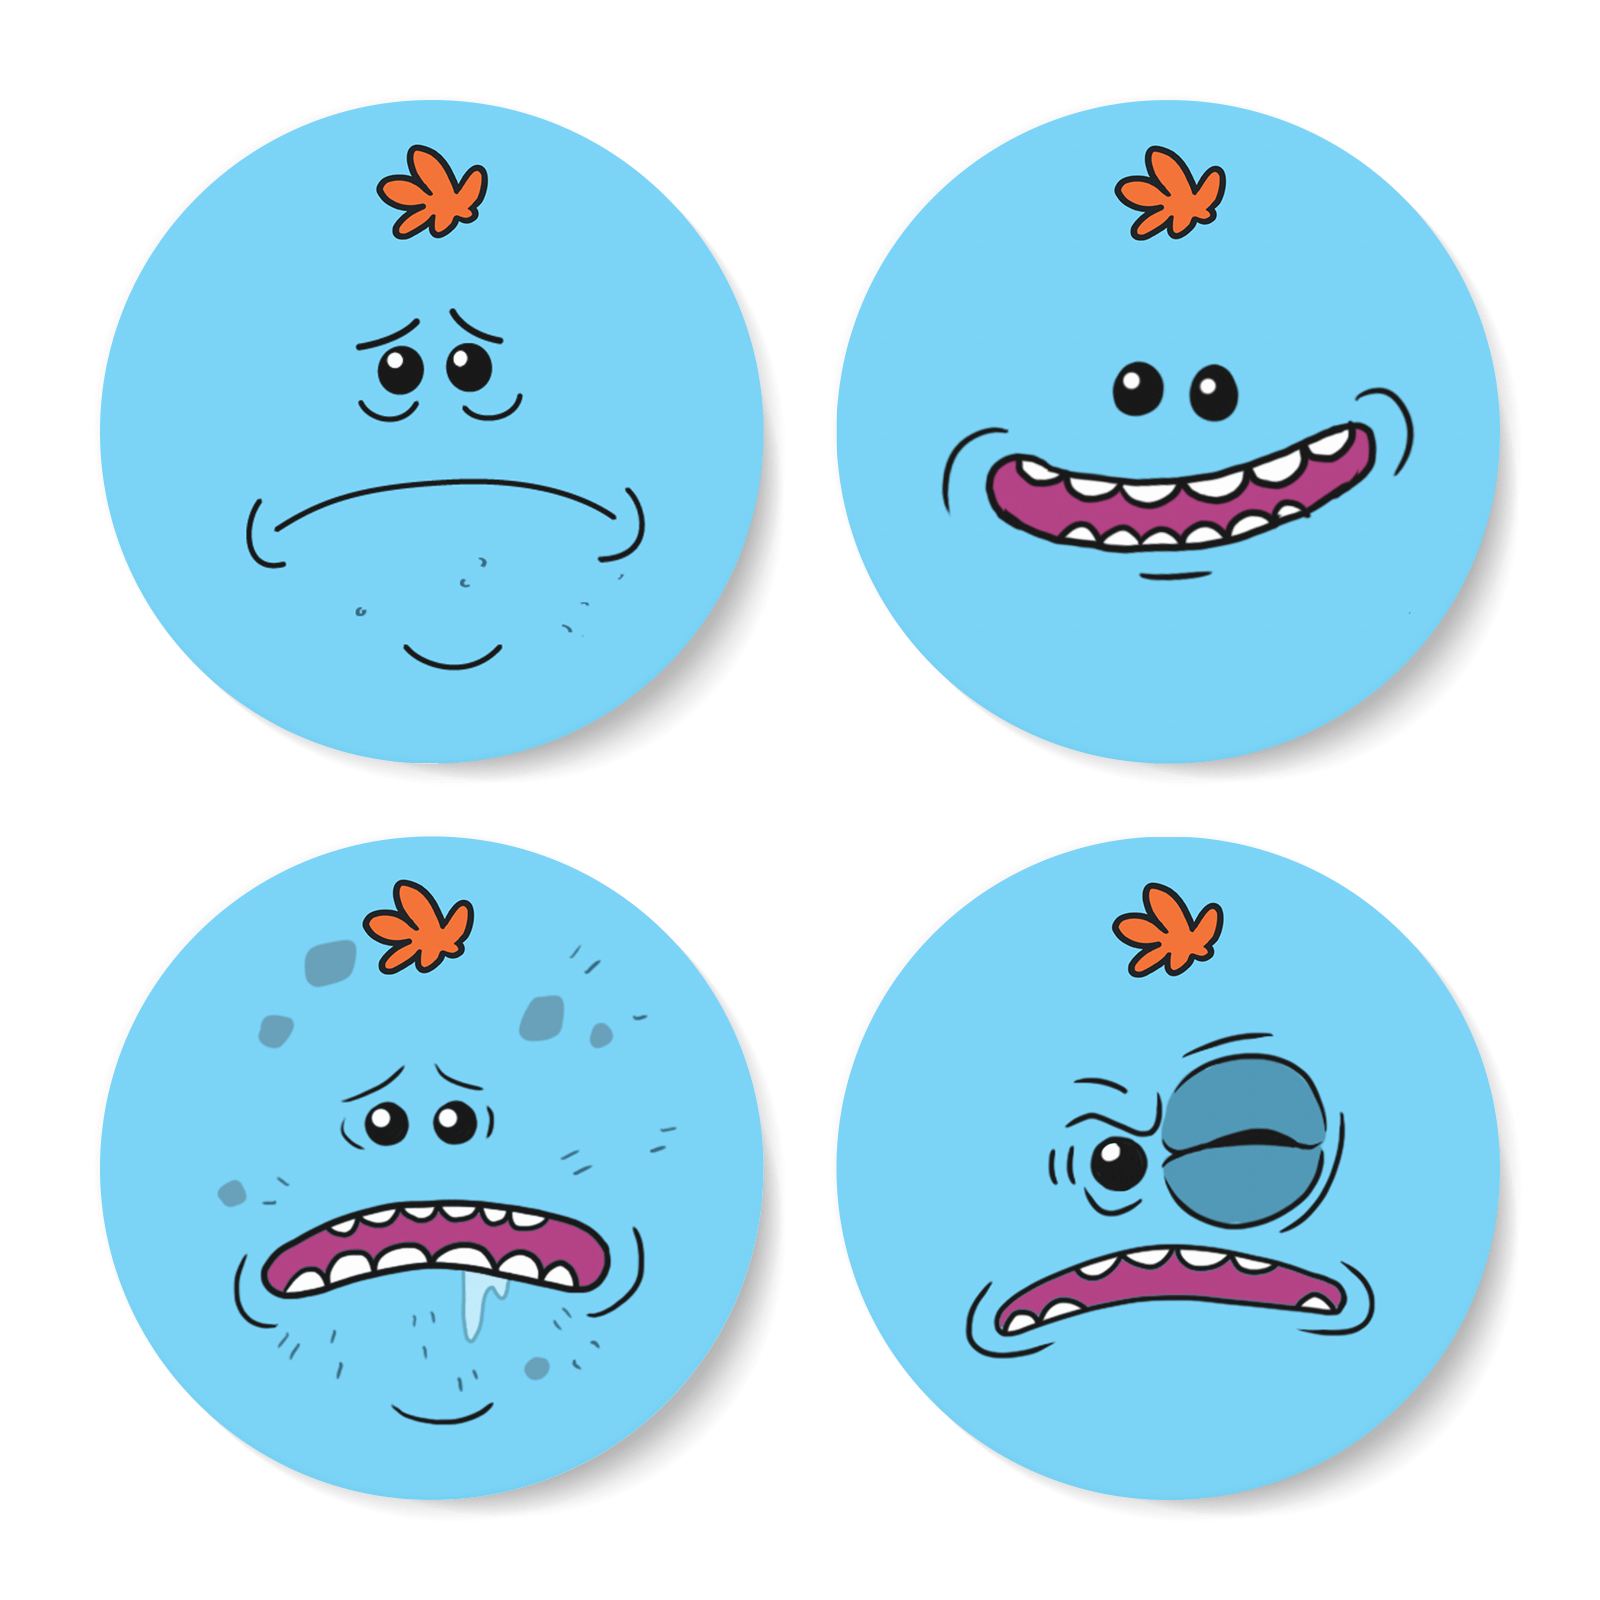 Photos - Other Souvenirs FACE Rick and Morty Mr Meeseeks  Coaster Set COA-4PK-RND-1757484 